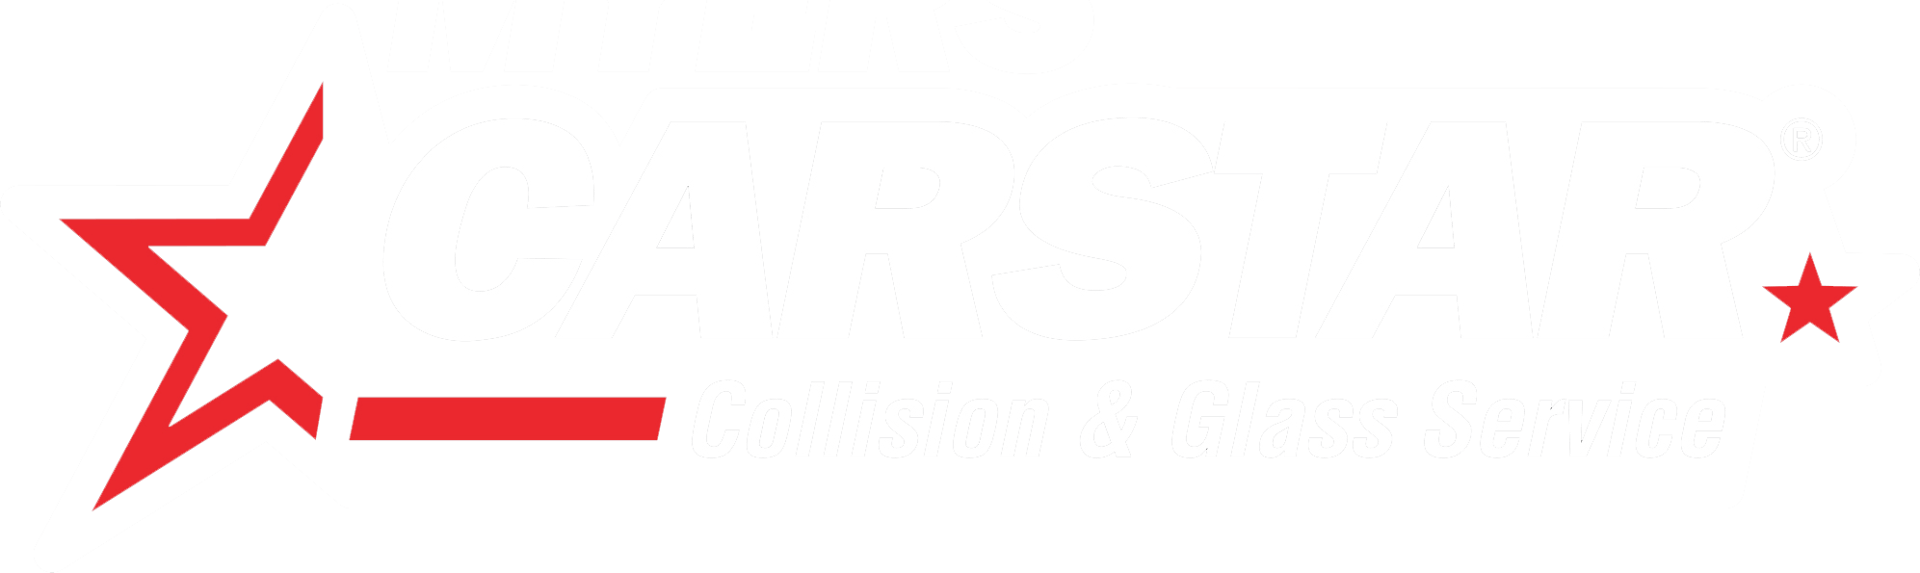 CARSTAR Collision and Glass Service